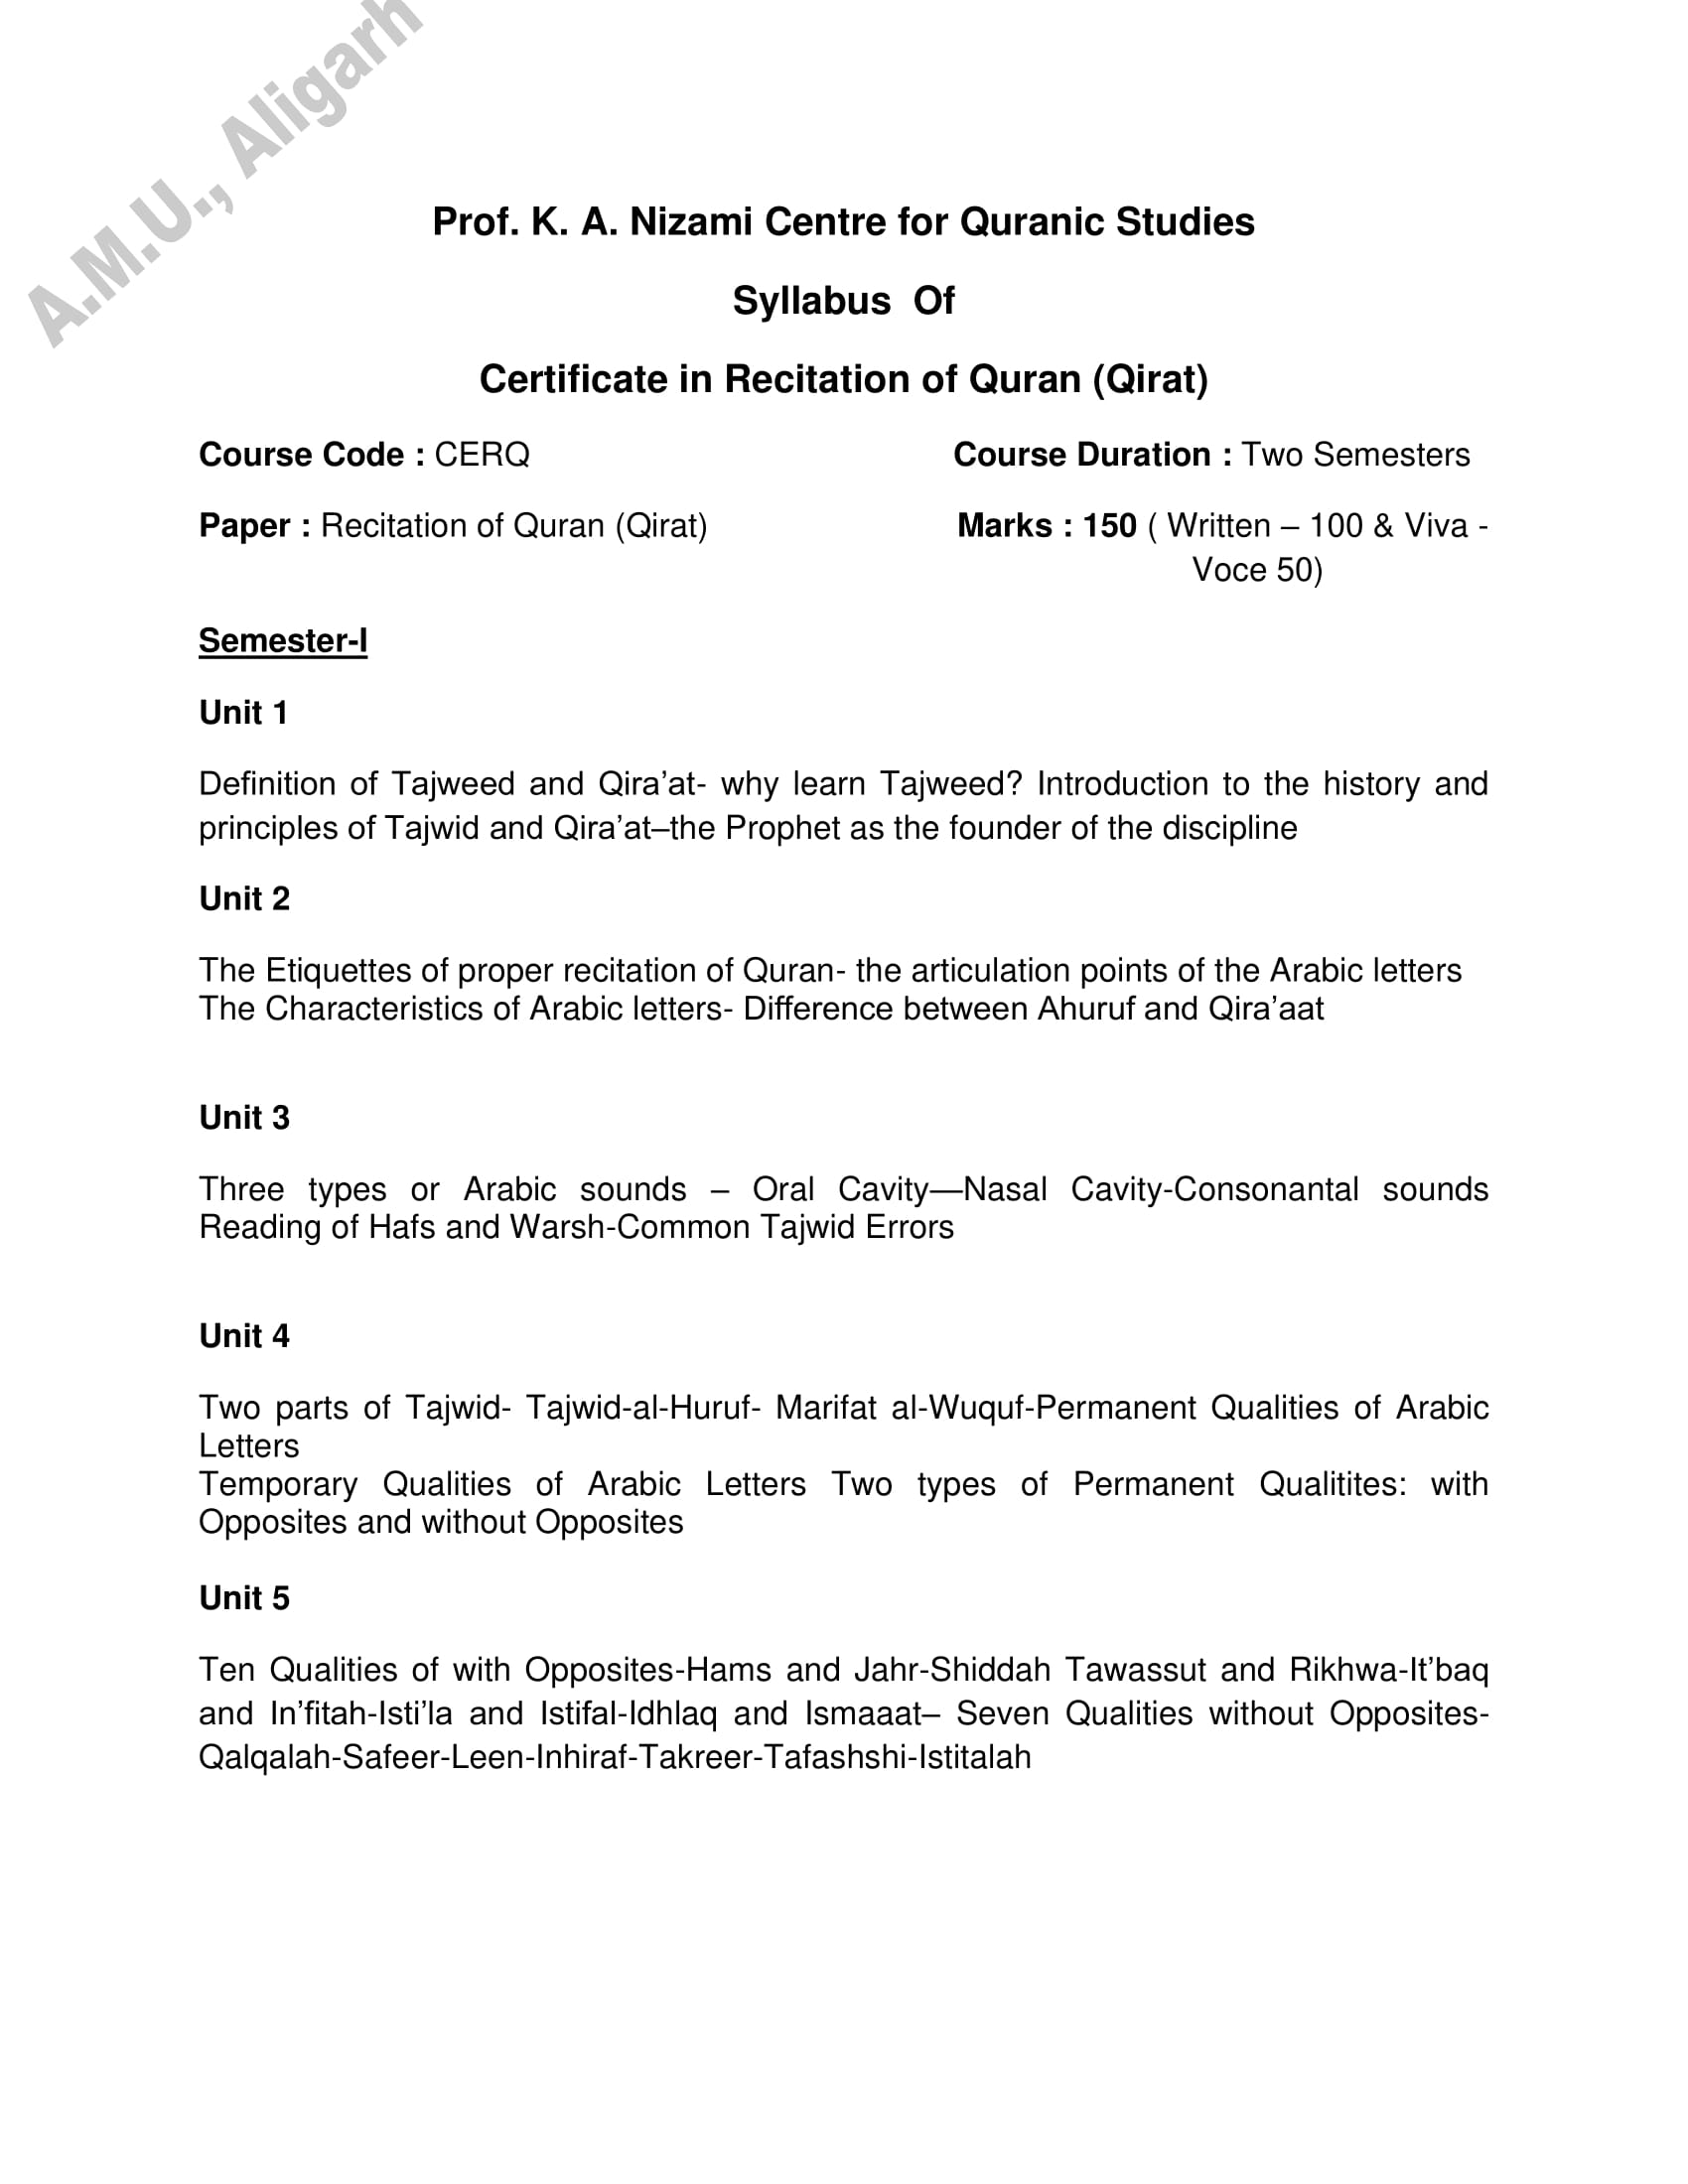 AMU Entrance Exam Syllabus for Certificate in Recitation of Quran (Qirat) - Page 1